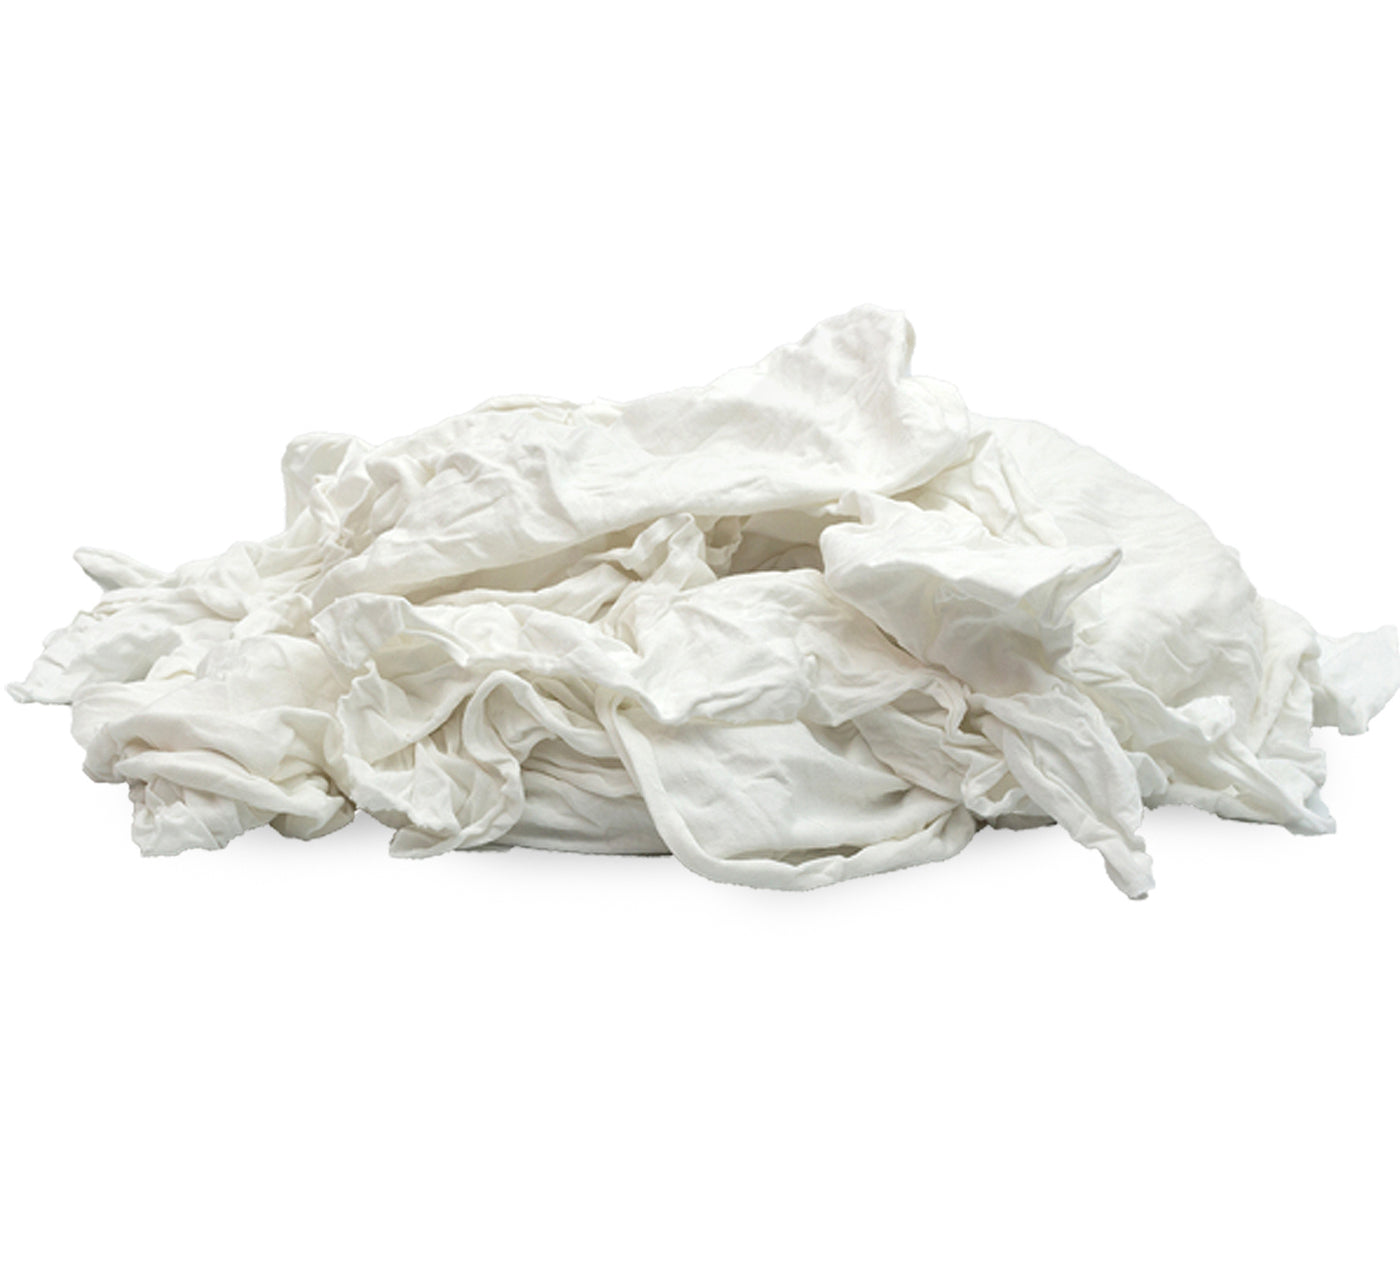  Lint Free White Knit Cotton Rags- 50 Lb. Box - Painters Rags-  Reclaimed T-Shirt Material : Health & Household